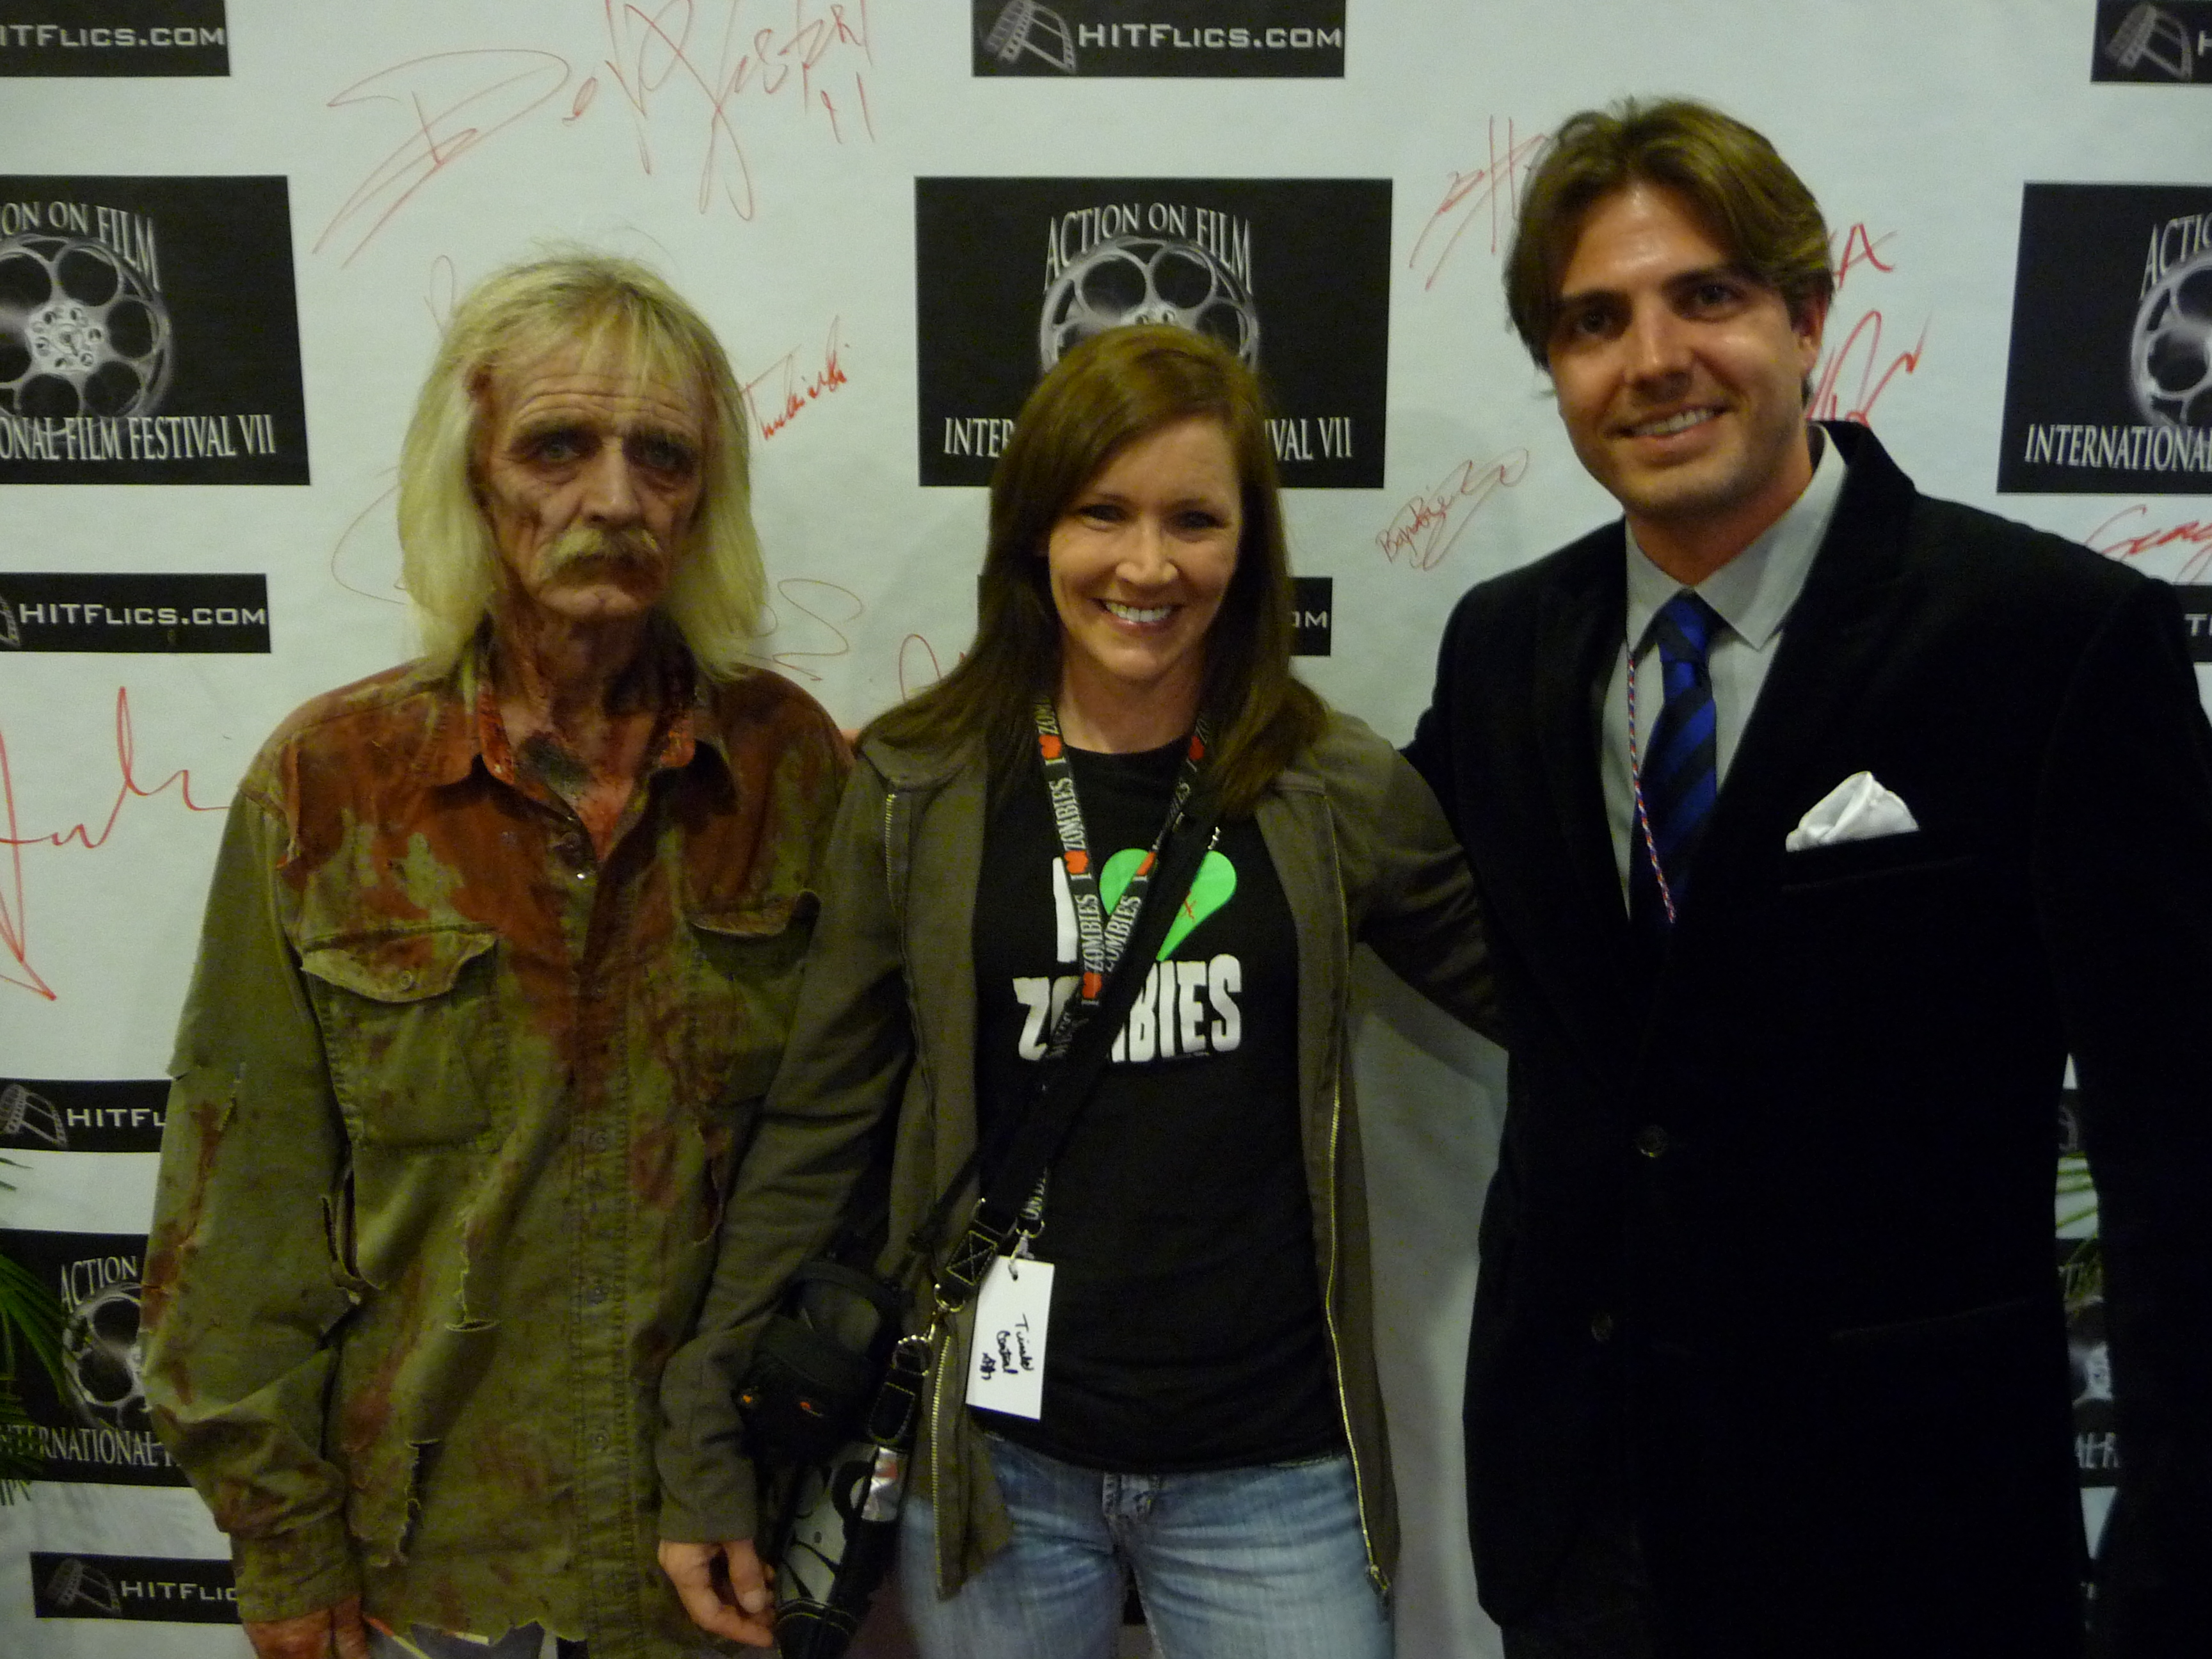 Tammy Dupal and Beau Nelson Zombie Drugs Premiere